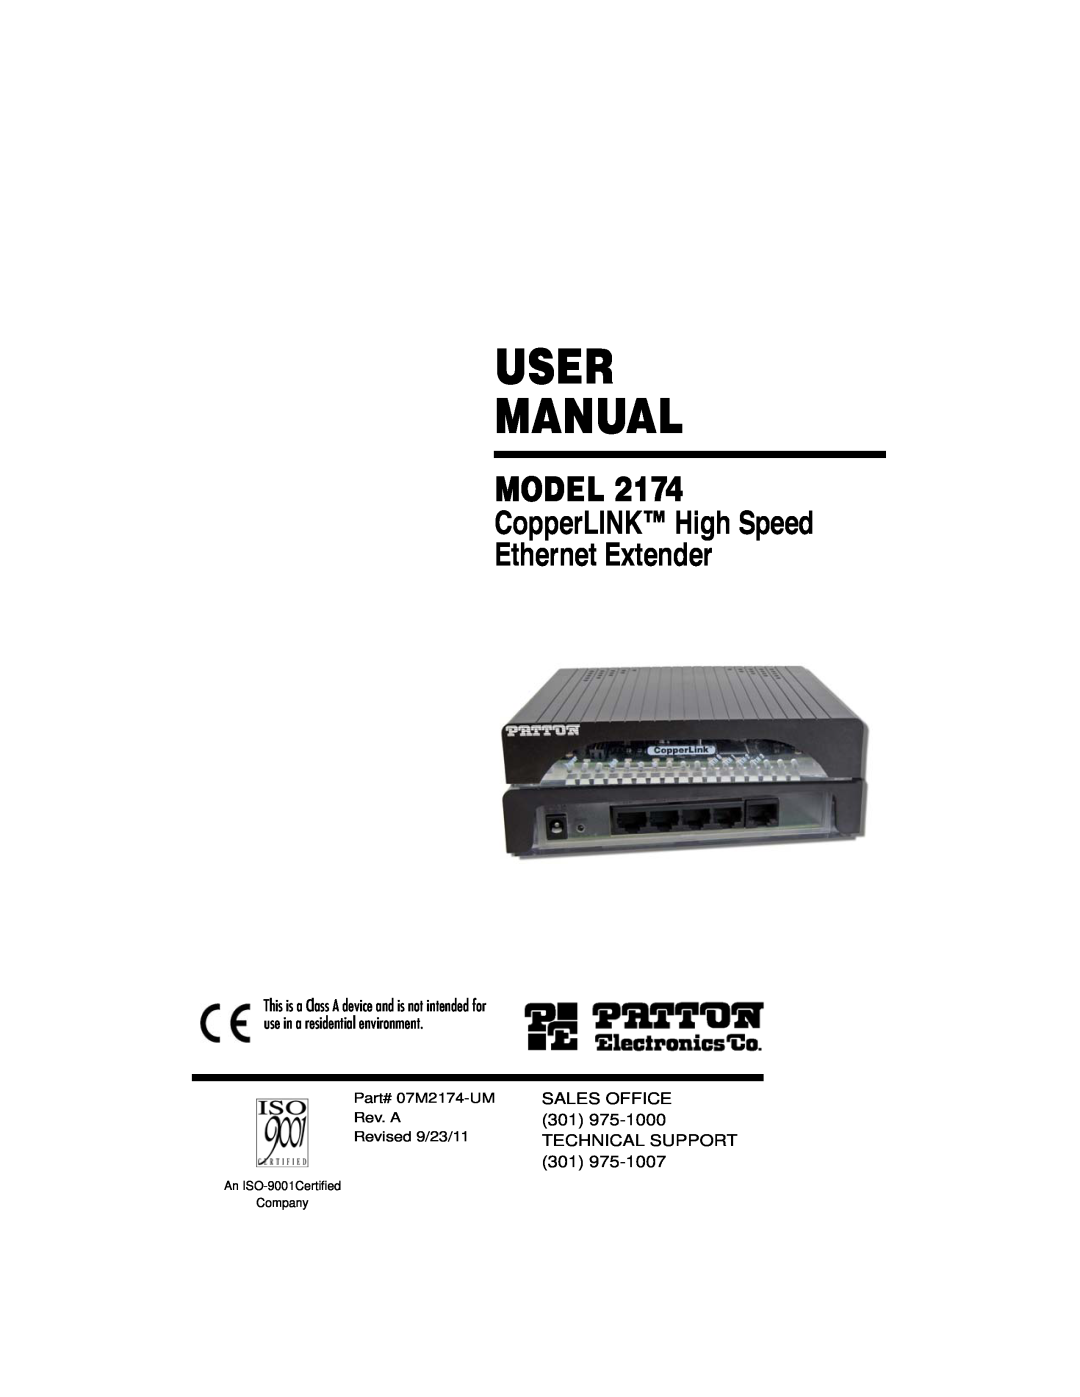 Patton electronic 2174 user manual User Manual, Model, CopperLINK High Speed Ethernet Extender 